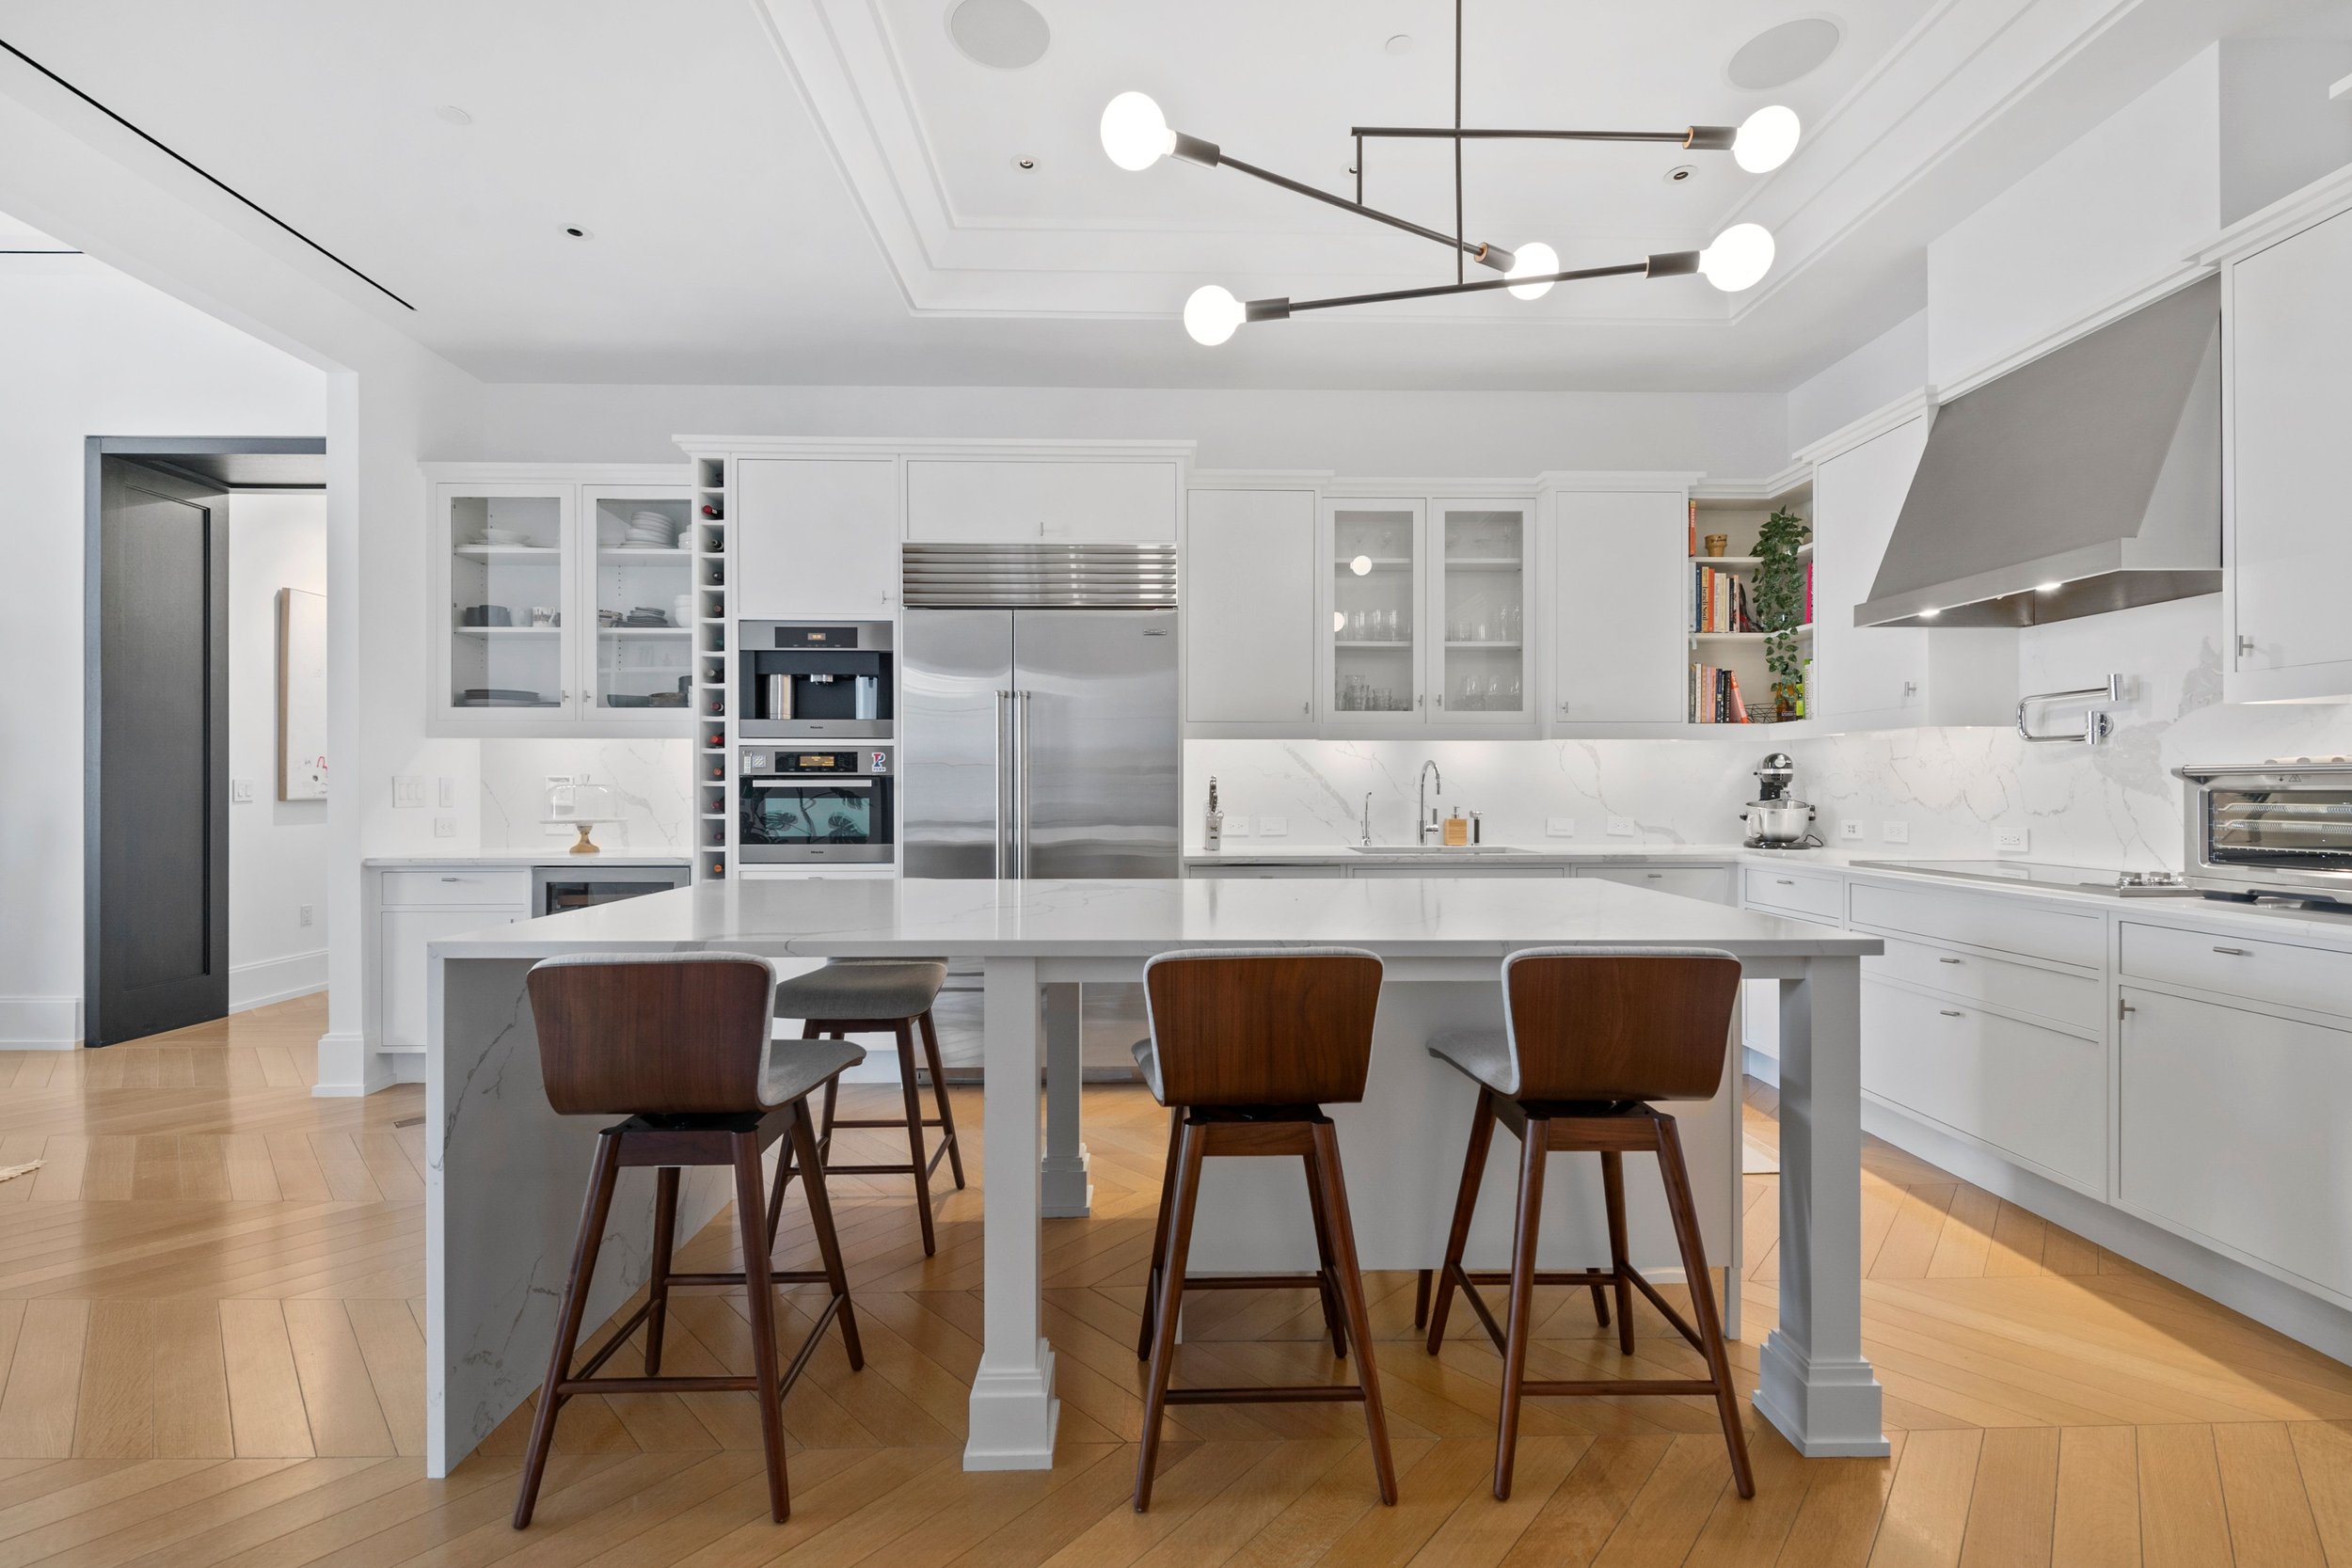  Upon entering this custom home, one is immediately drawn to the oversized tilt-and-turn windows in every room of this almost 3,900 SF corner home with views facing South, West and North. French herringbone oak flooring and up to 12 foot ceilings set